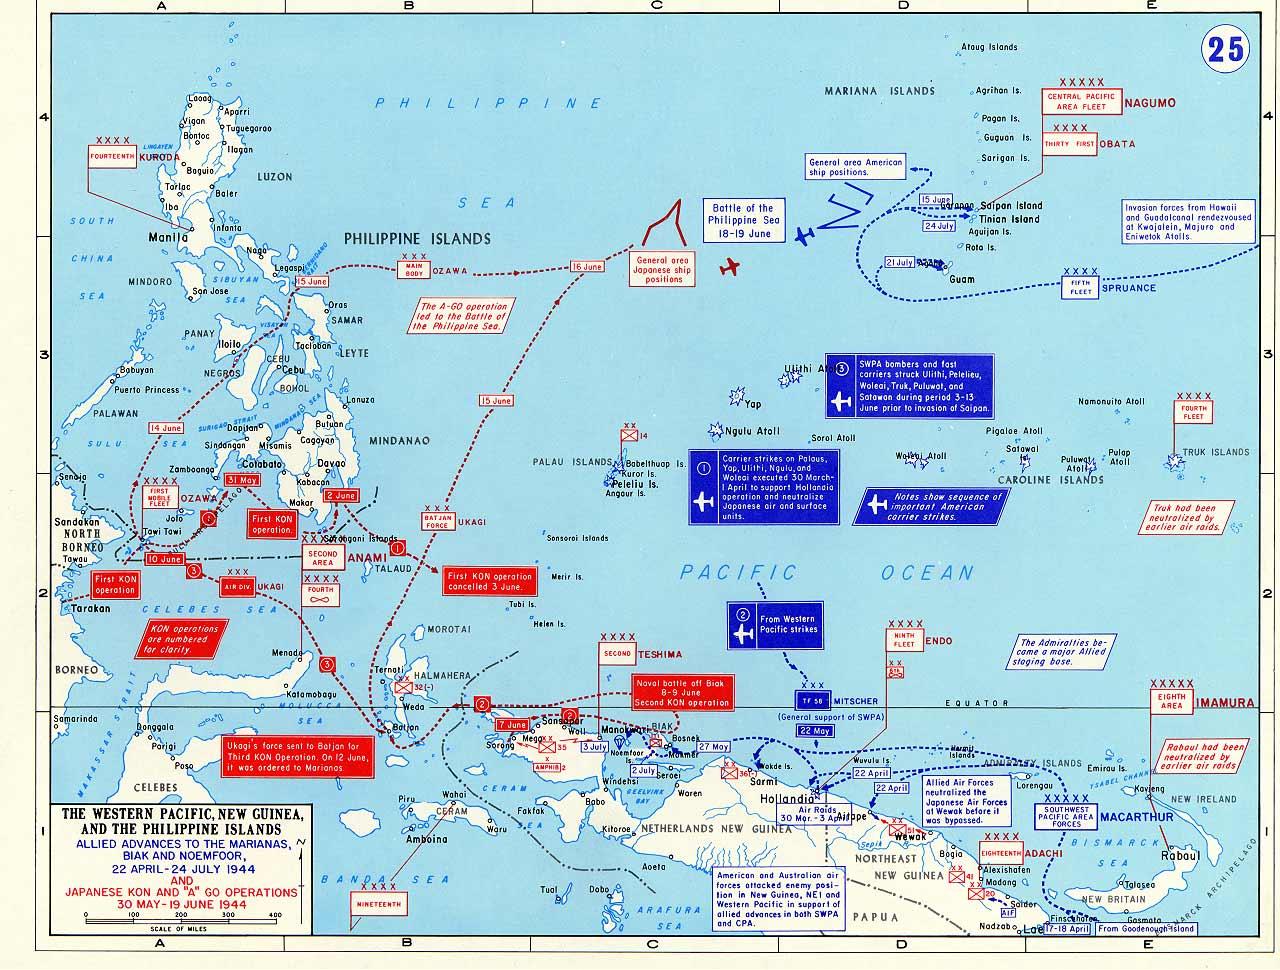 Map detailing Allied advances in New Guinea and the Mariana Islands, 22 Apr-24 Jul 1944